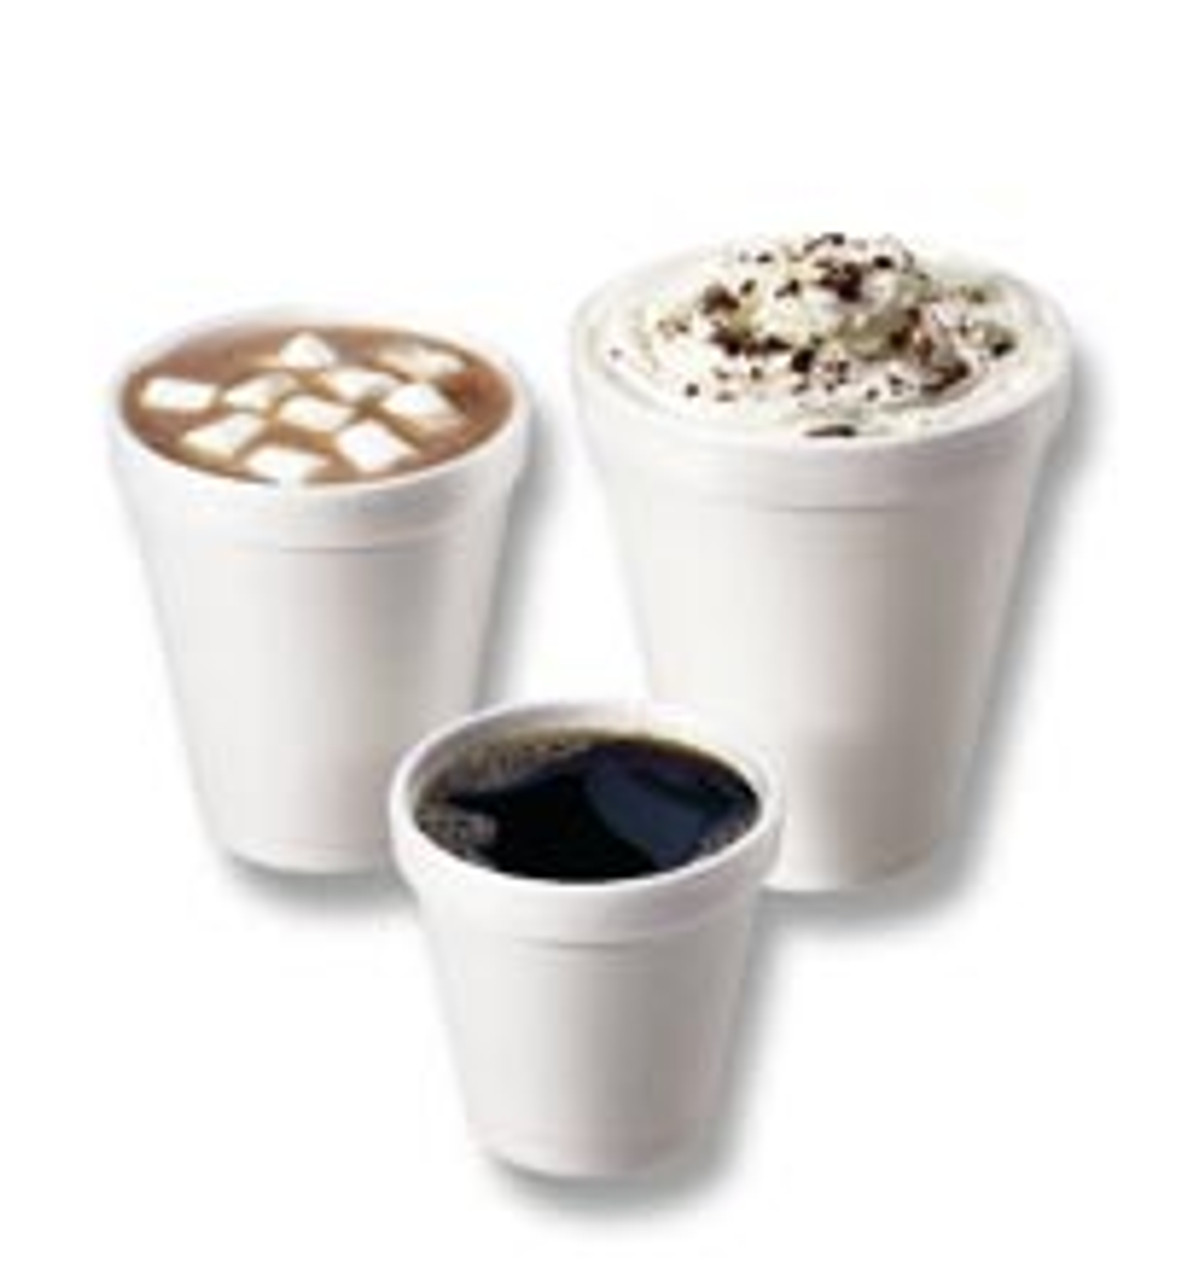 Maintain beverages at their optimal temperature longer with WinCup insulated foam cups. Not only do foam cups keep beverages at their proper serving temperature on the inside, they keep hands comfortable on the outside. Hot or cold, insulated foam delivers drinks the way they were meant to be.